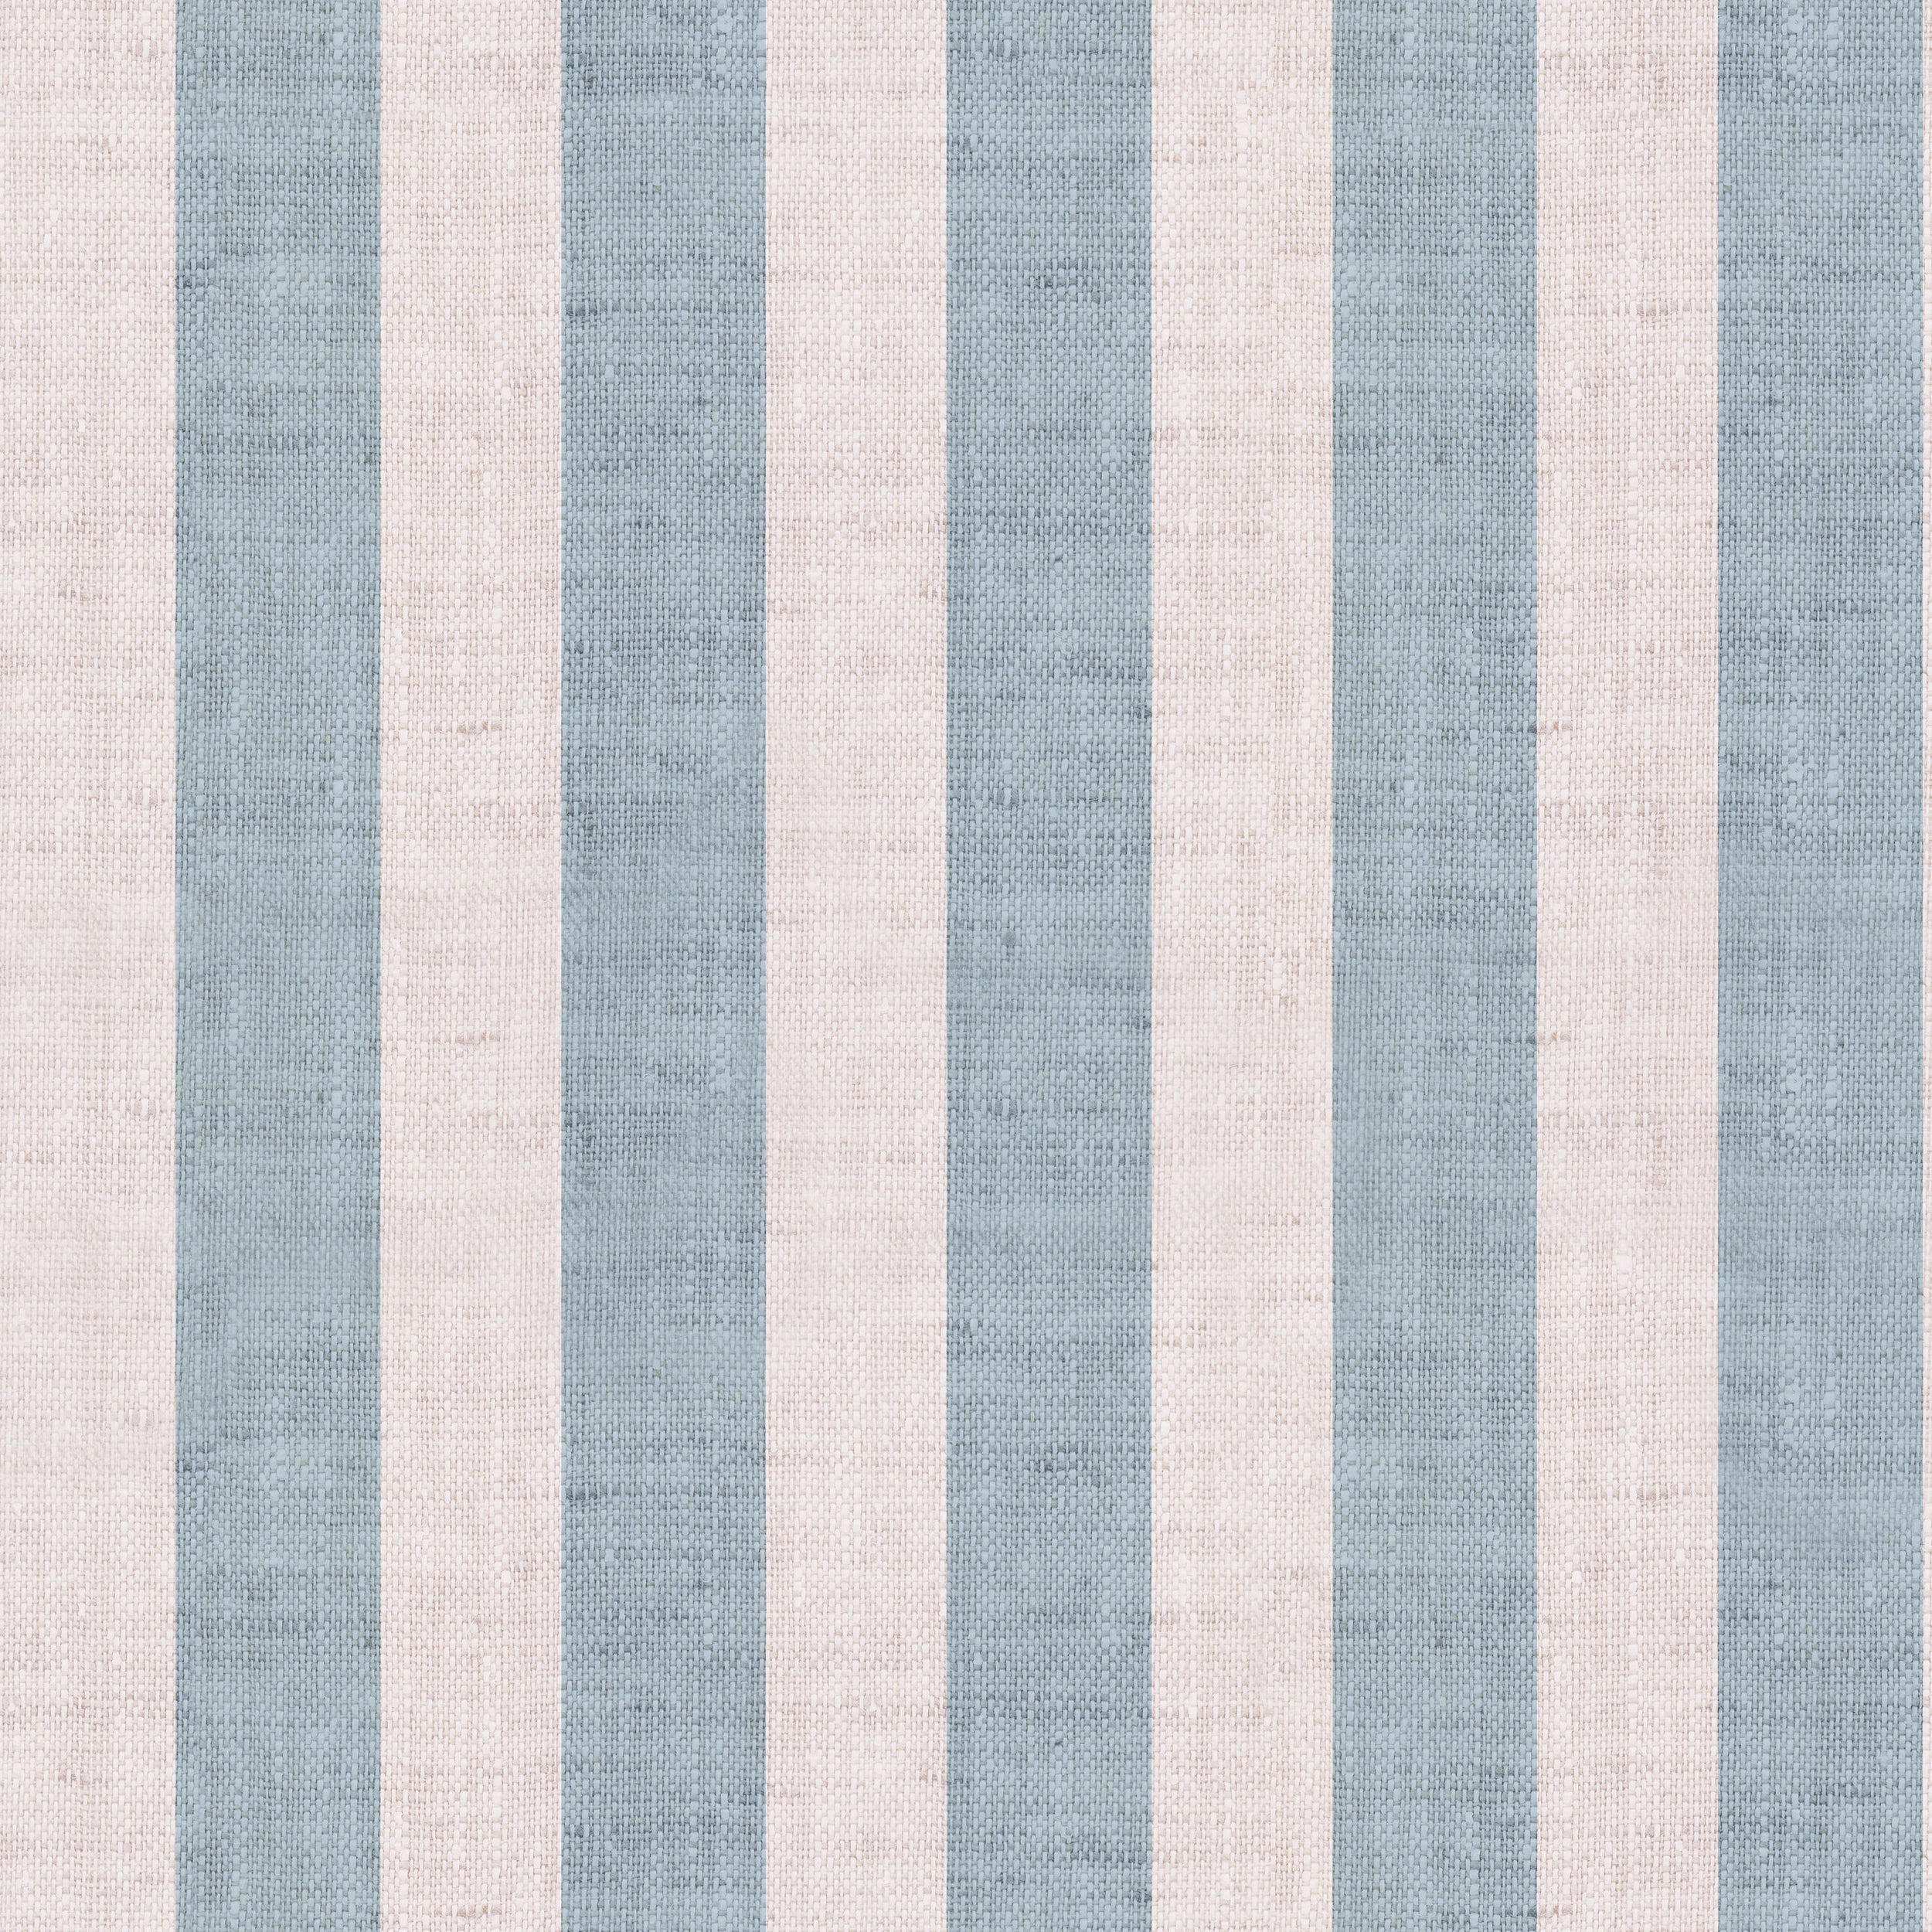 Close-up of Ticking Fabrics 7 II Wallpaper featuring alternating vertical stripes in soft blue and pale cream. The texture resembles a woven linen fabric, conveying a simple yet elegant aesthetic suitable for various interior styles.